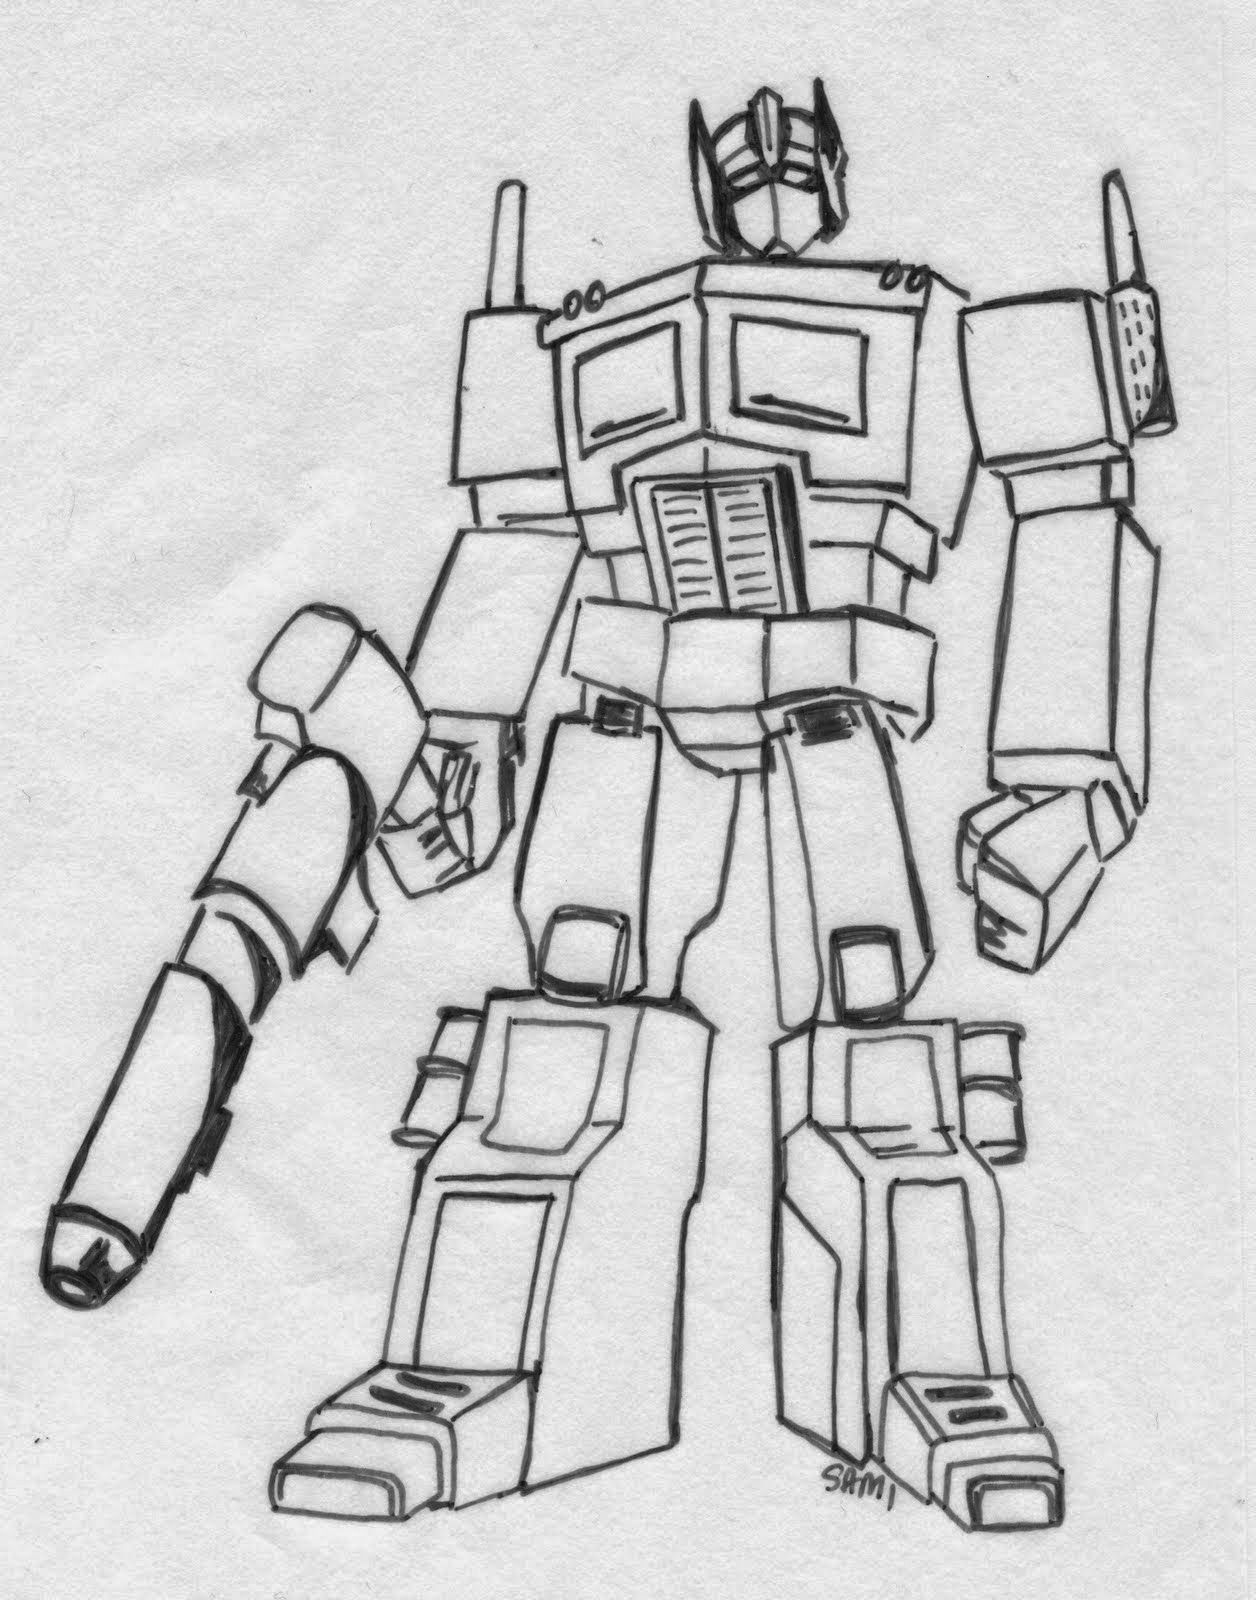 AWESOME How to Draw TRANSFORMERS - OPTIMUS PRIME | Transformers optimus  prime, Optimus prime, Transformers optimus